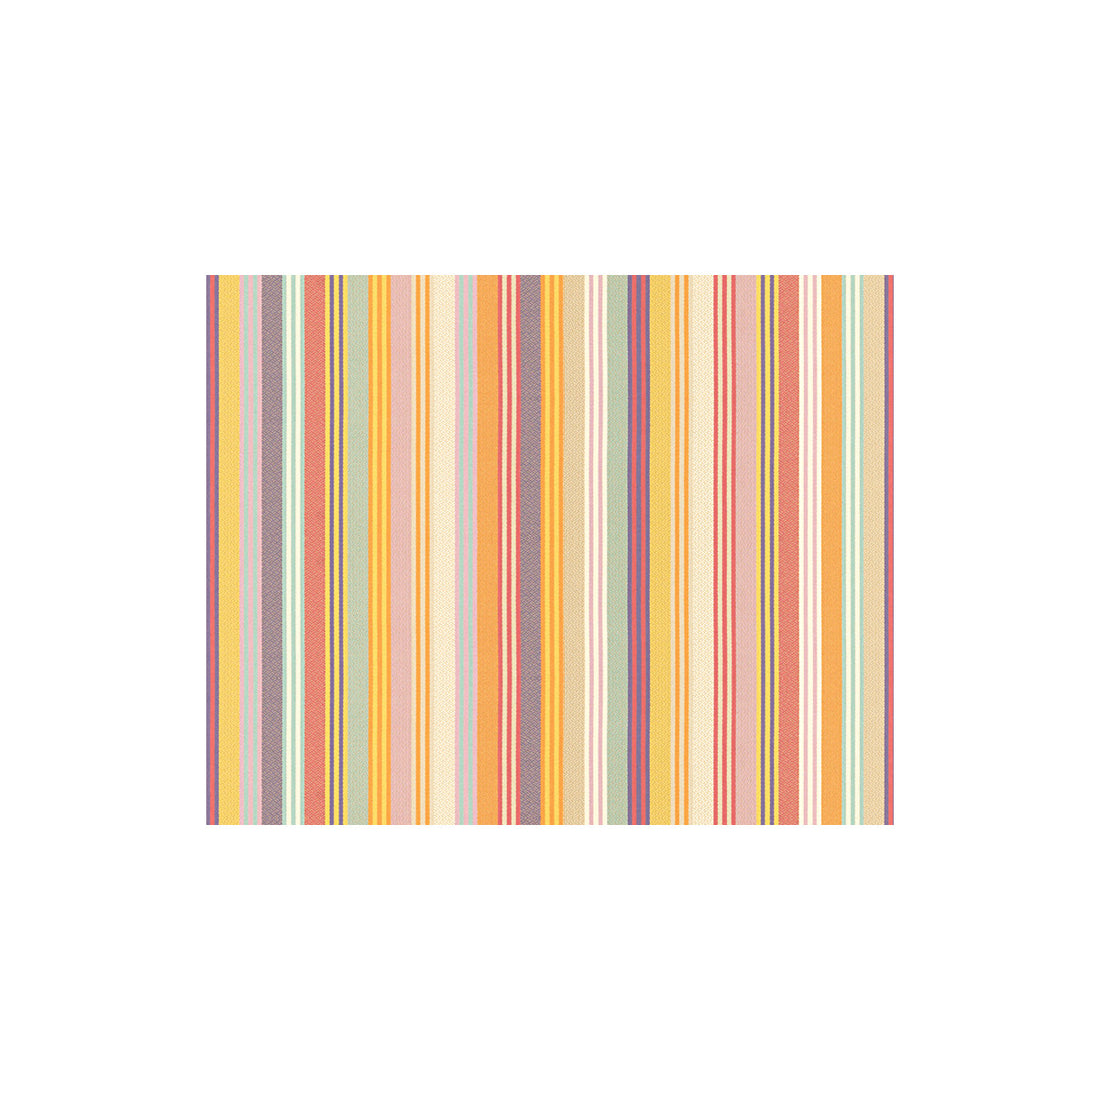 Merton Stripe fabric in prism color - pattern 31716.410.0 - by Kravet Couture in the The Echo Design collection